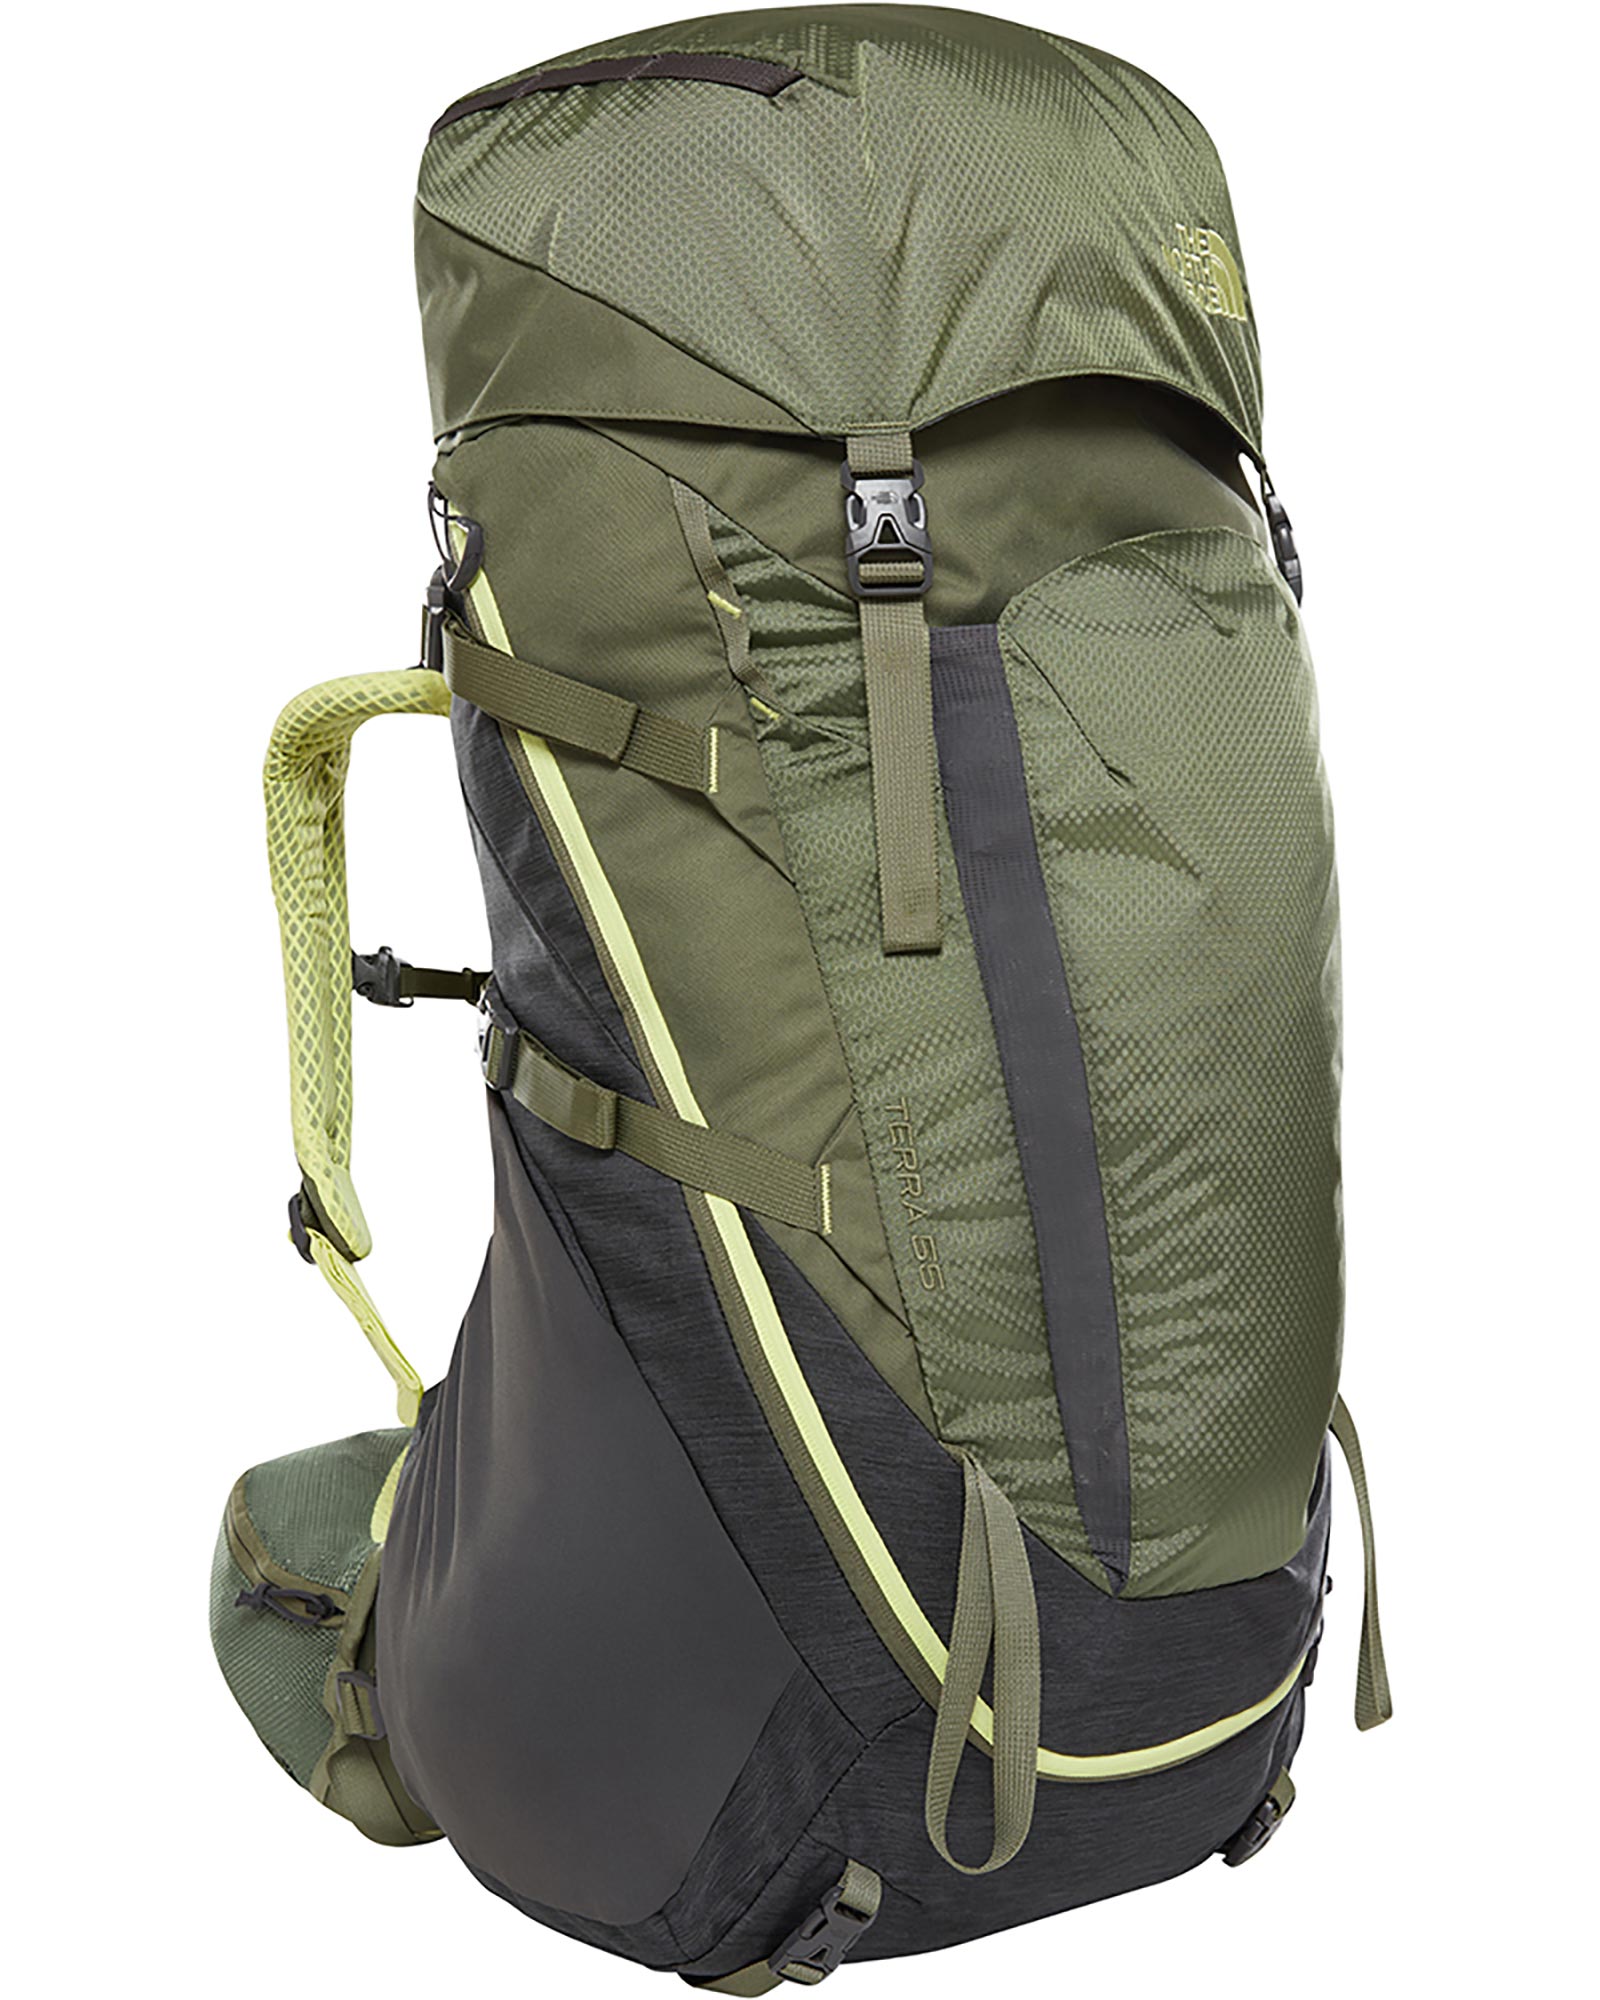 The North Face Terra 55 Women’s Backpack - TNF Dark Grey Heather/Four Leaf Clover XS/S